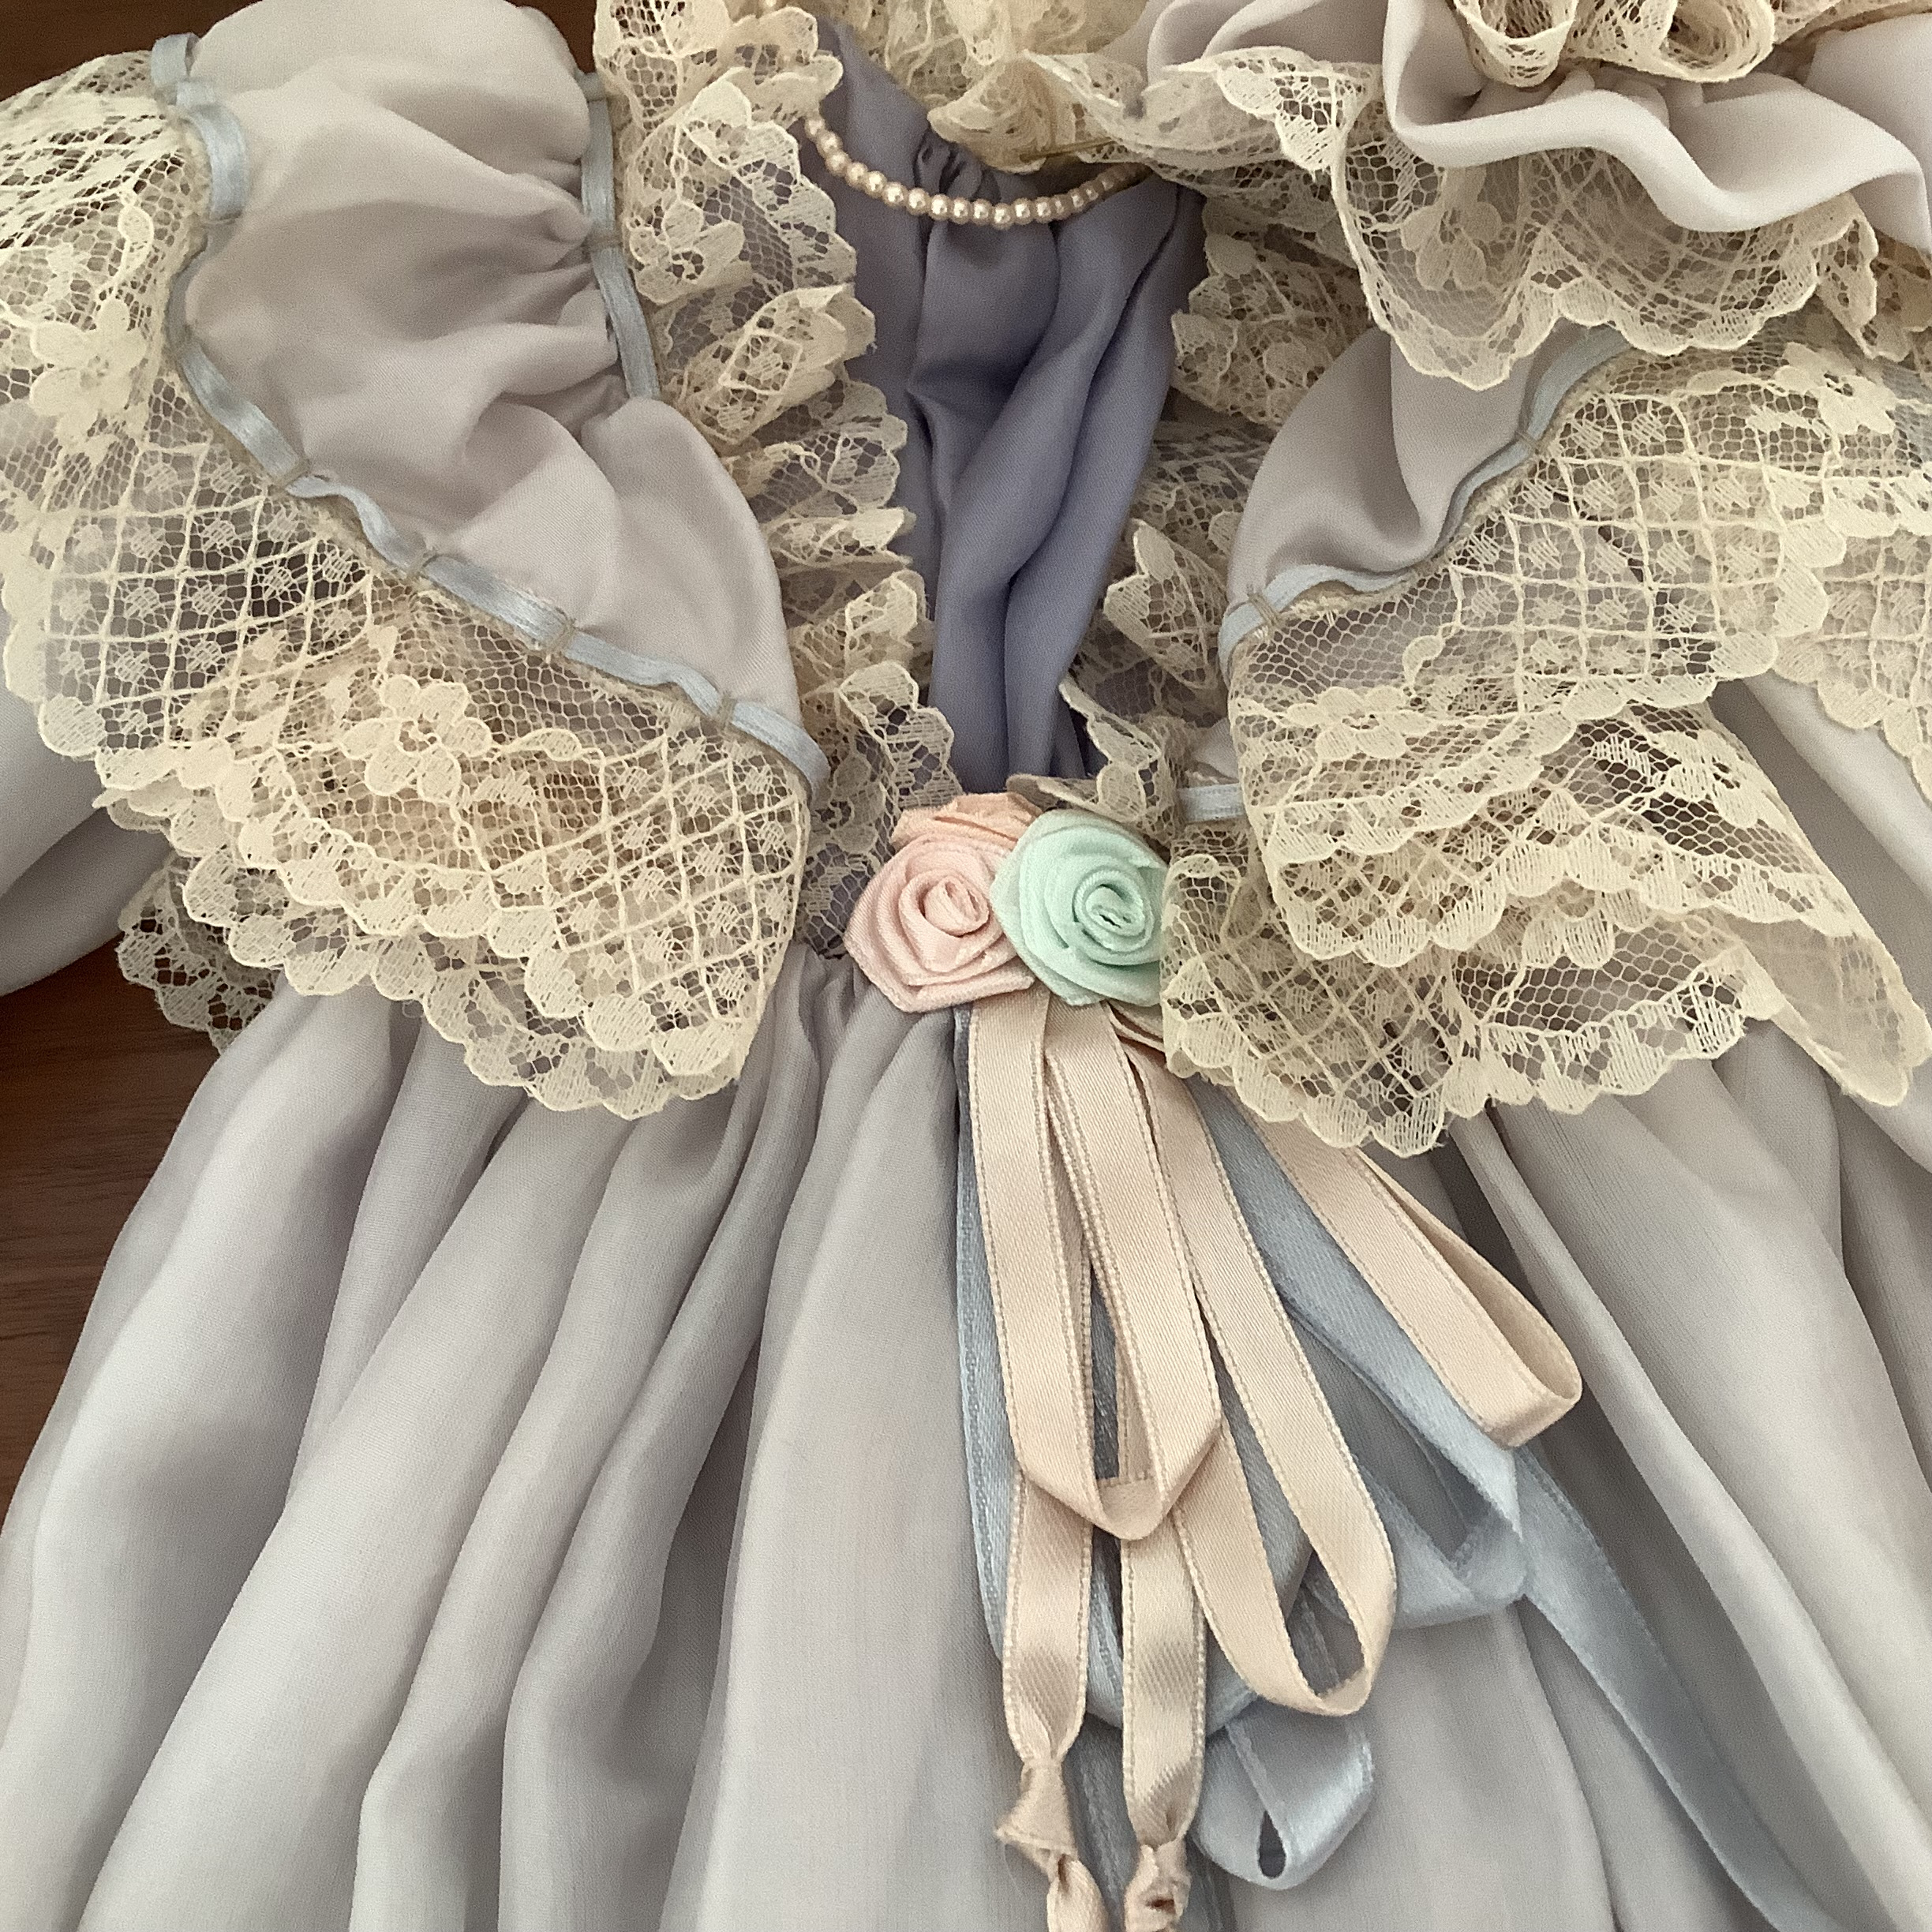 Close-up picture of grey lace-trimmed dress with ribbon rose overlay removed